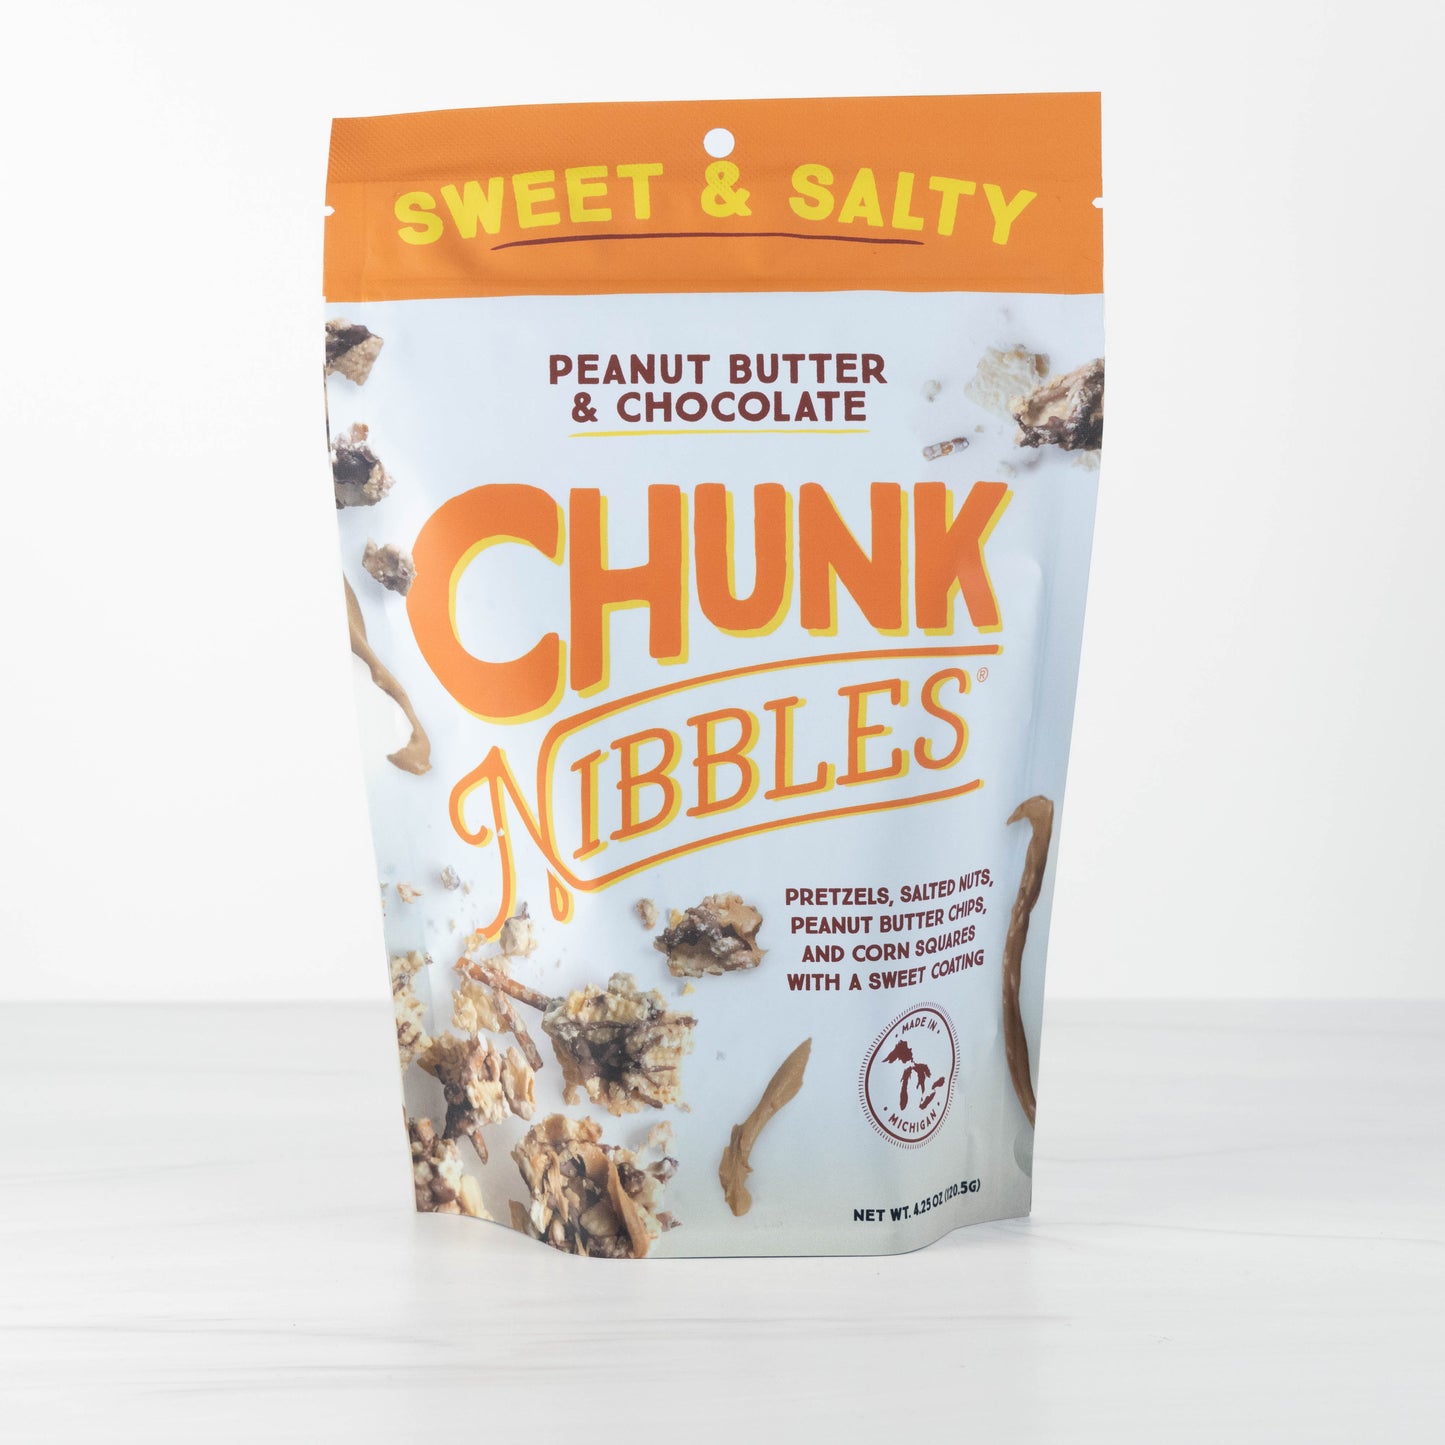 Peanut Butter Chocolate Chunk Nibbles